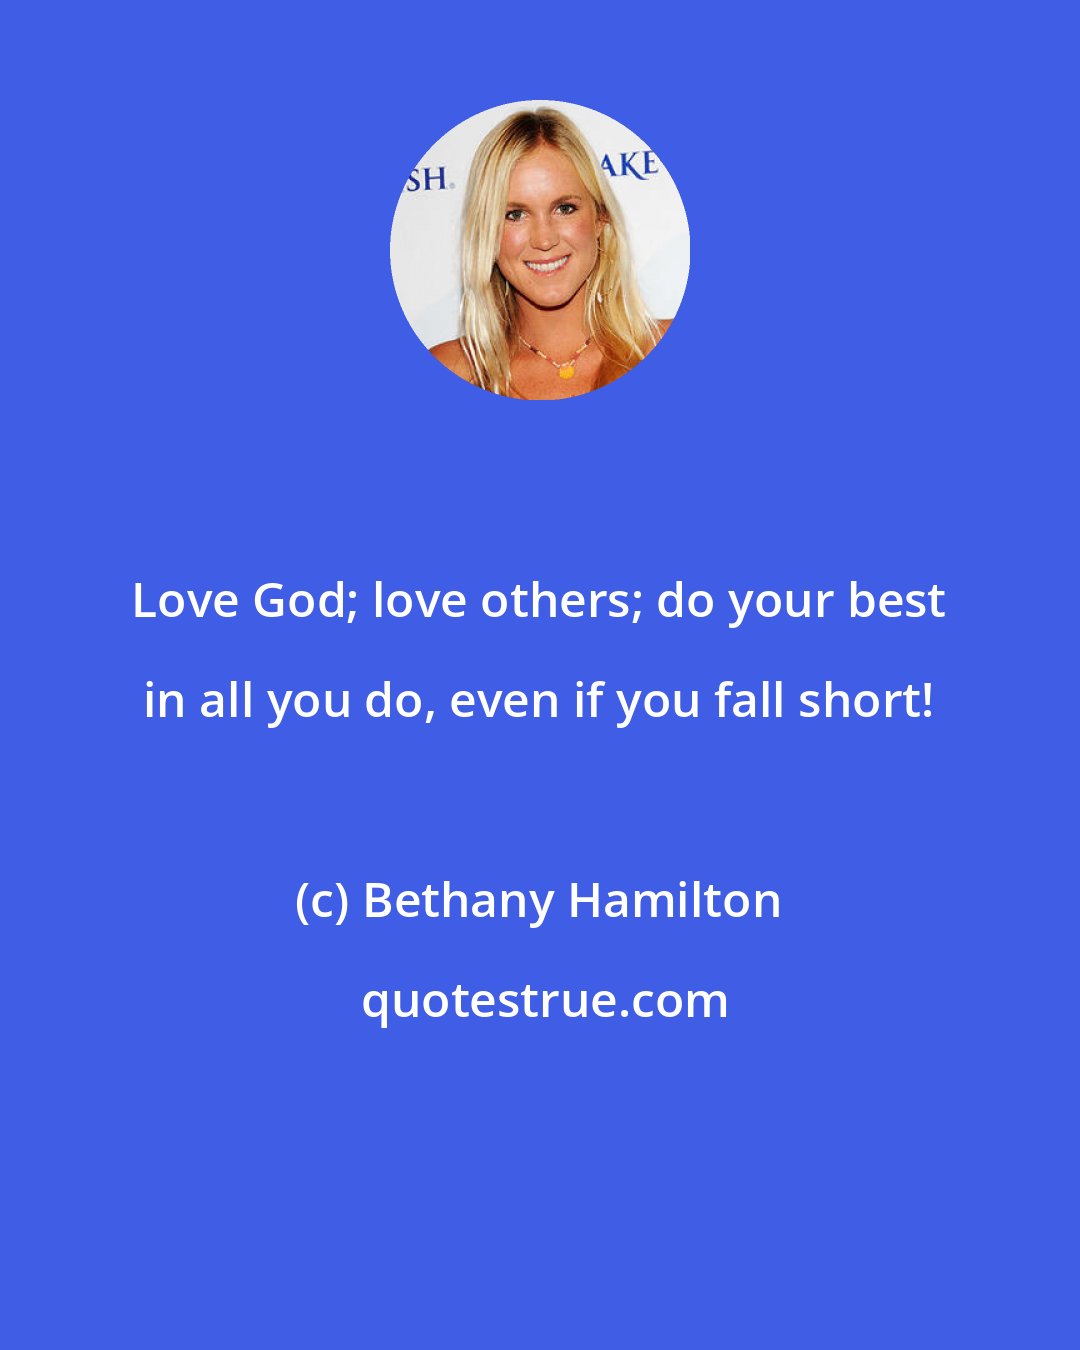 Bethany Hamilton: Love God; love others; do your best in all you do, even if you fall short!